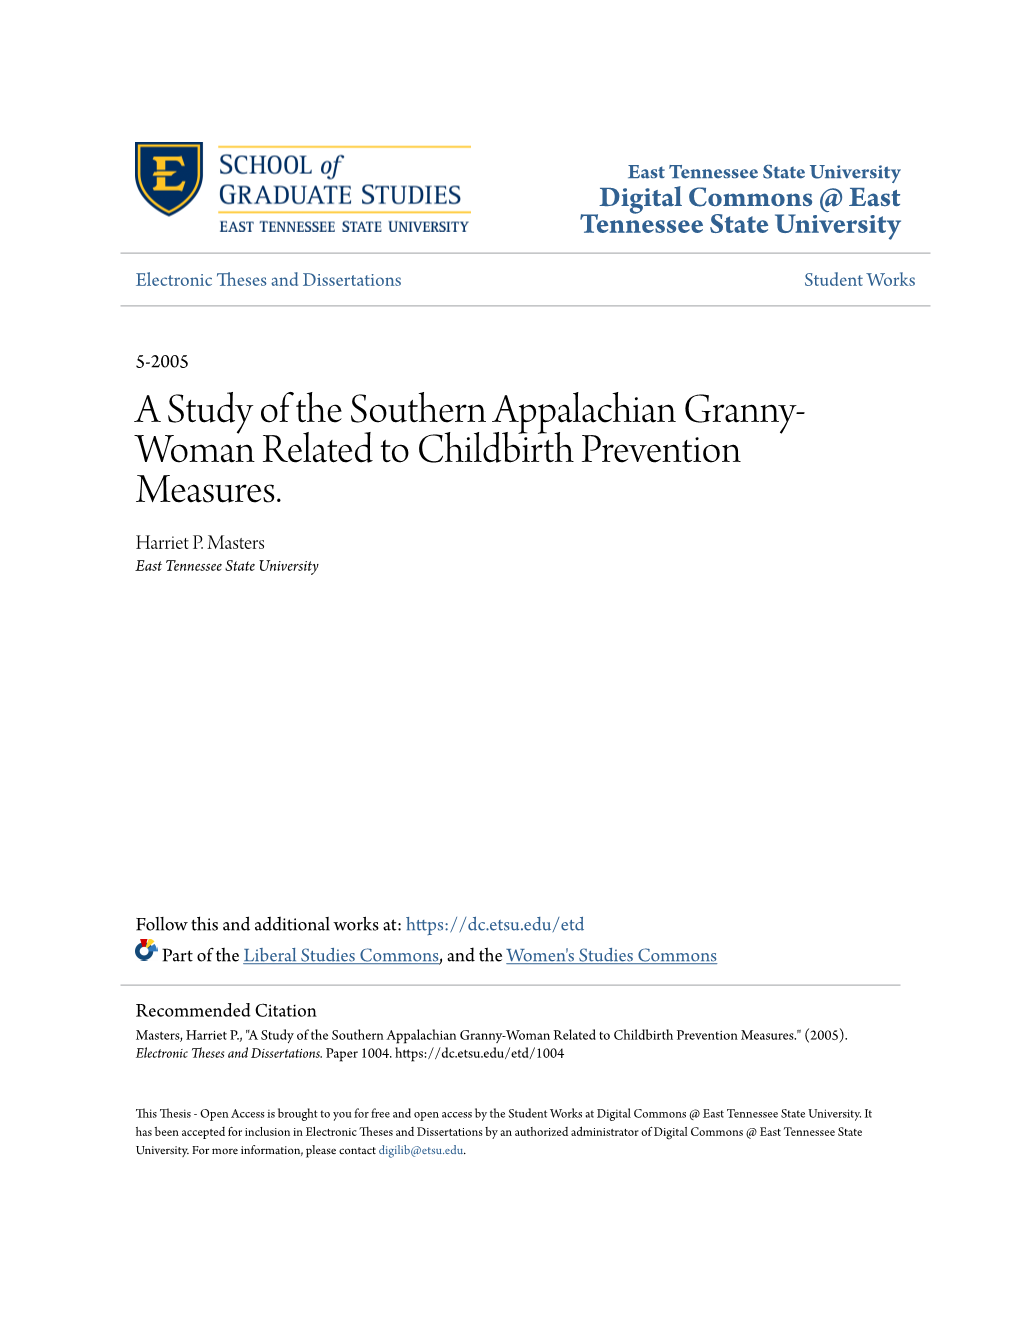 A Study of the Southern Appalachian Granny-Woman Related to Childbirth Prevention Measures." (2005)